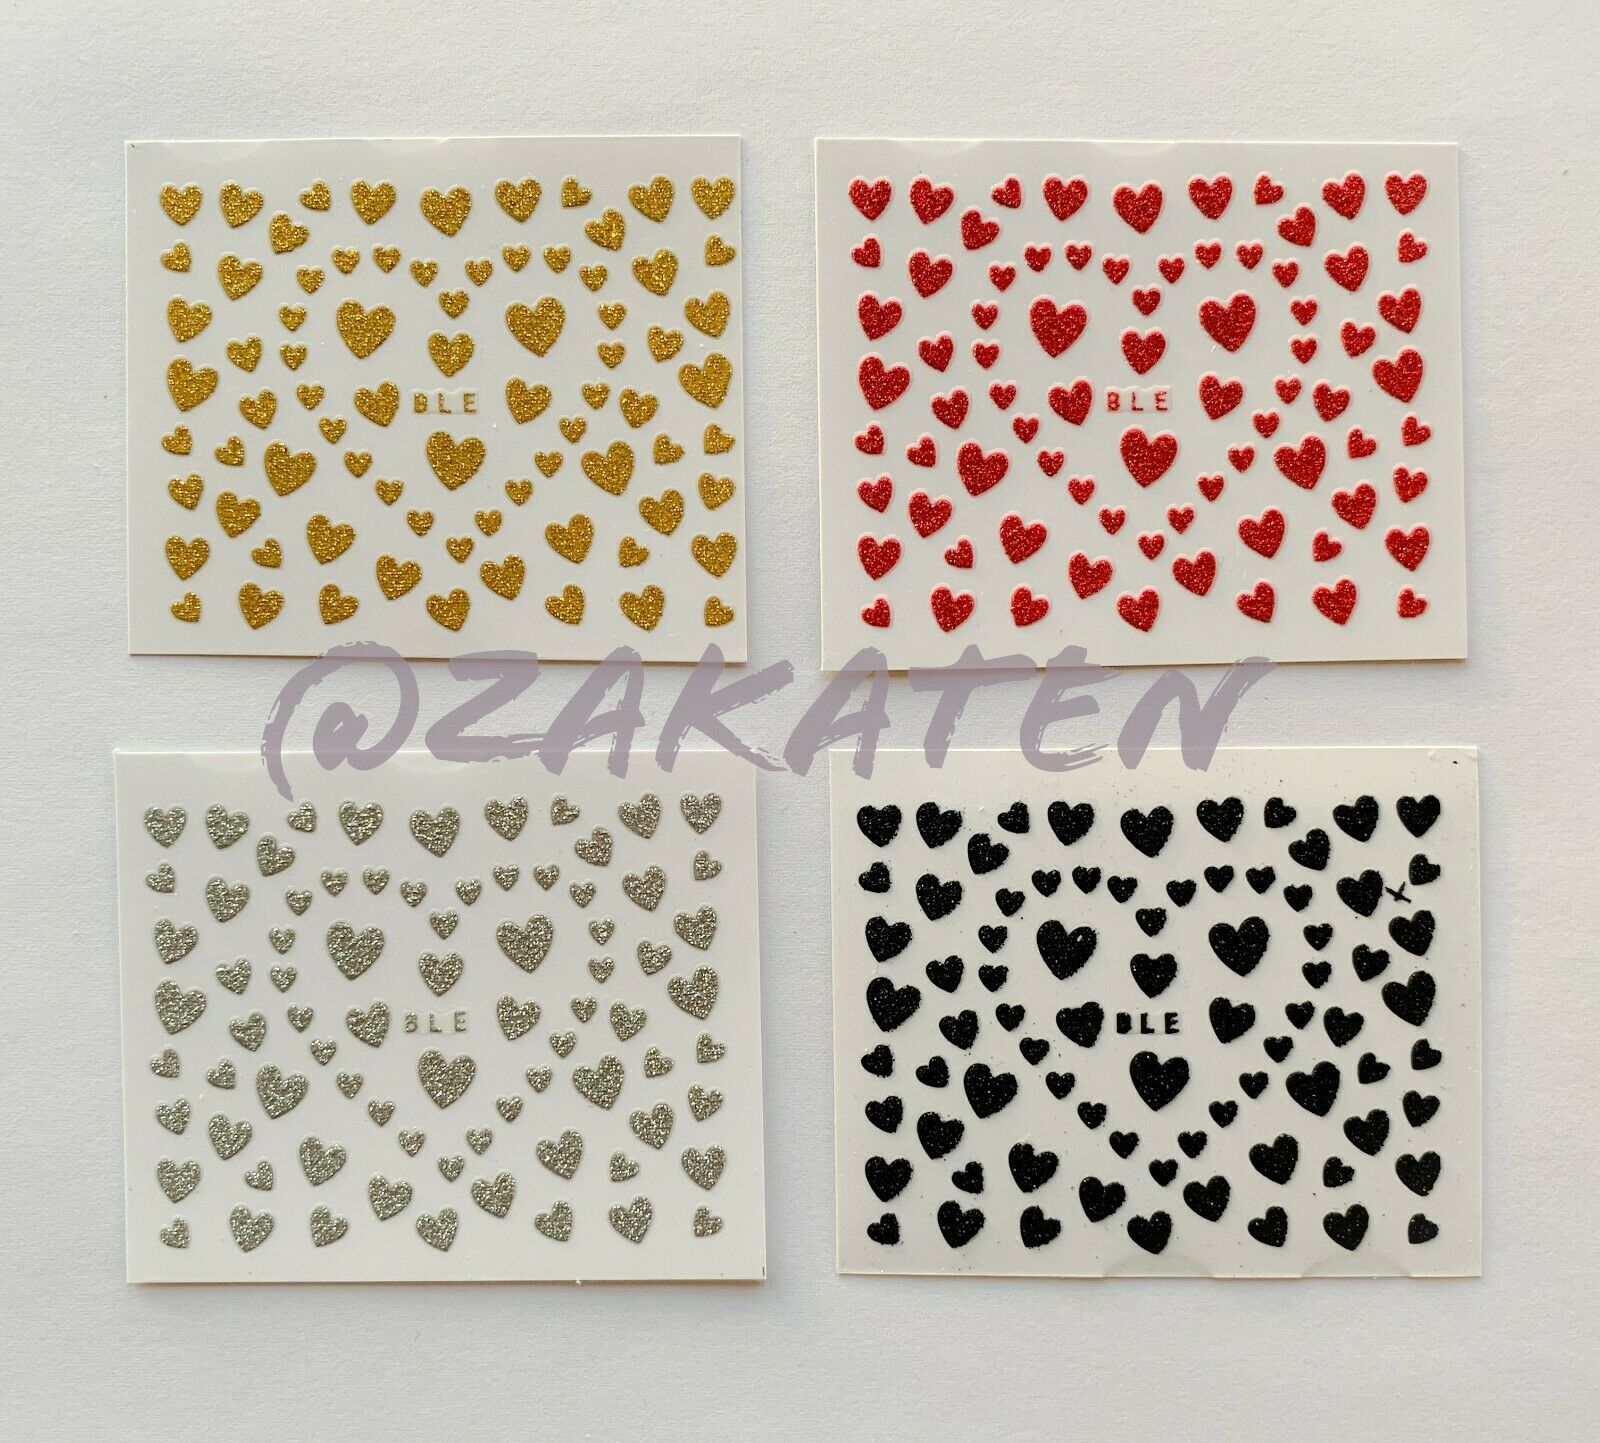 3d Nail Art Stickers Adhesive Transfer Glittery Hearts Series 4 Colors Us Seller